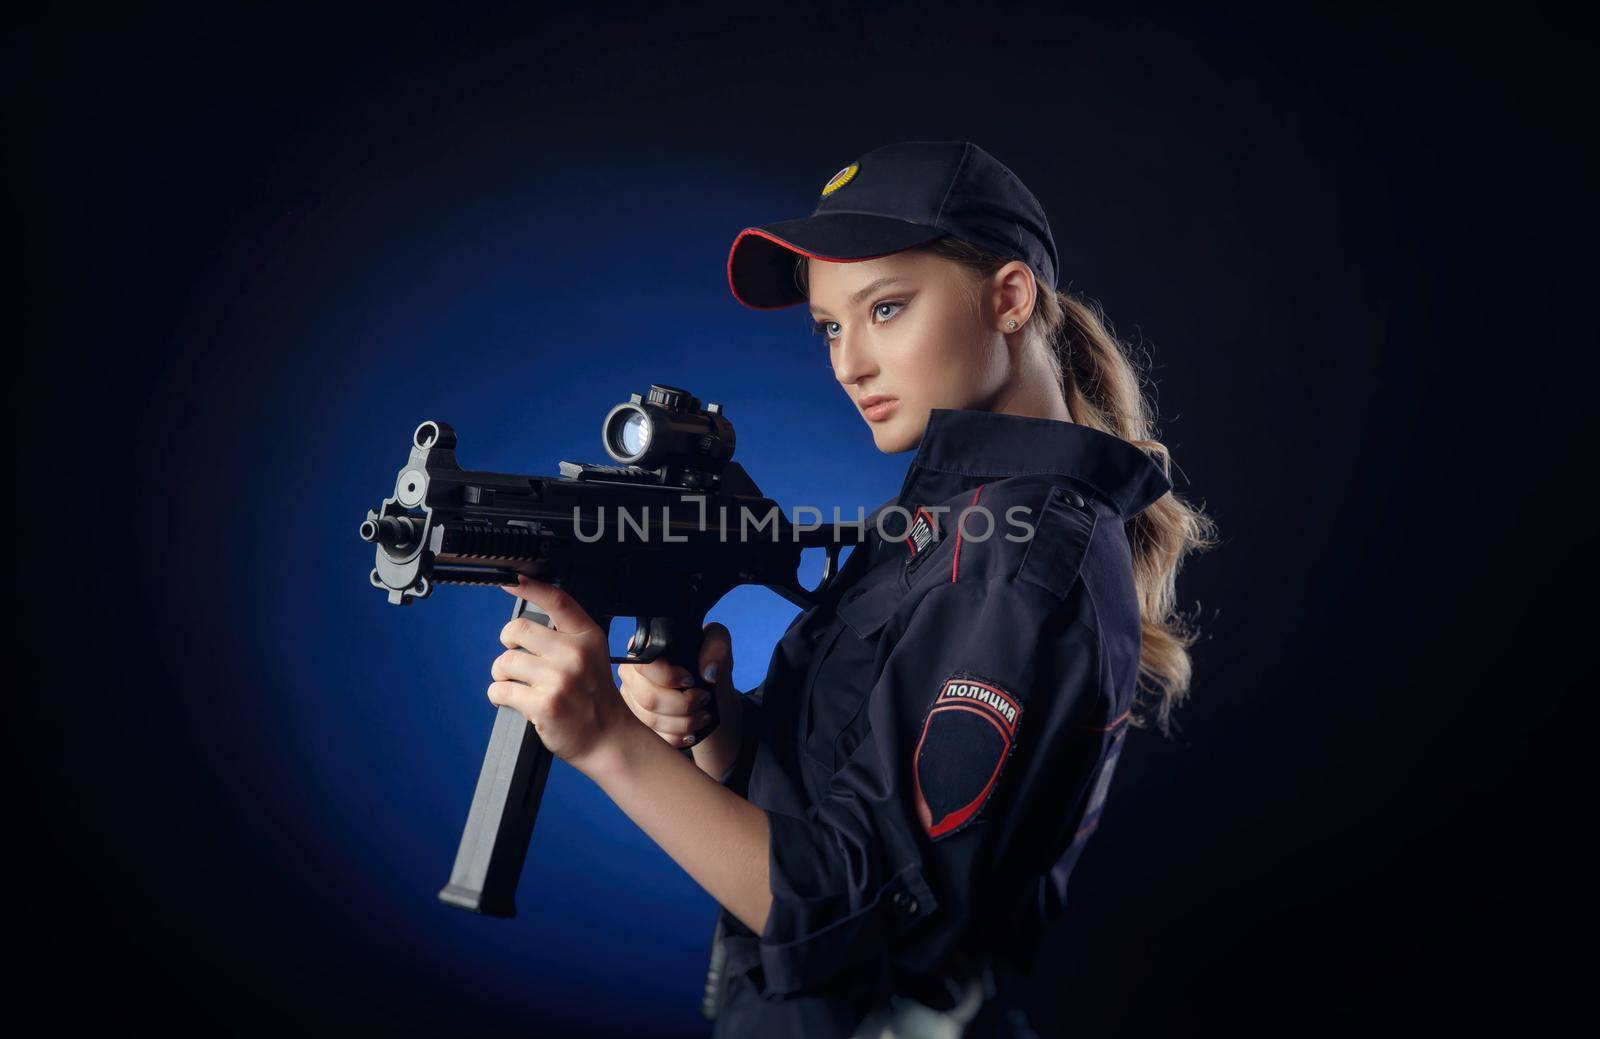 the girl in the police uniform with a gun is a Russian policeman with gun. English translation of Police by Rotozey